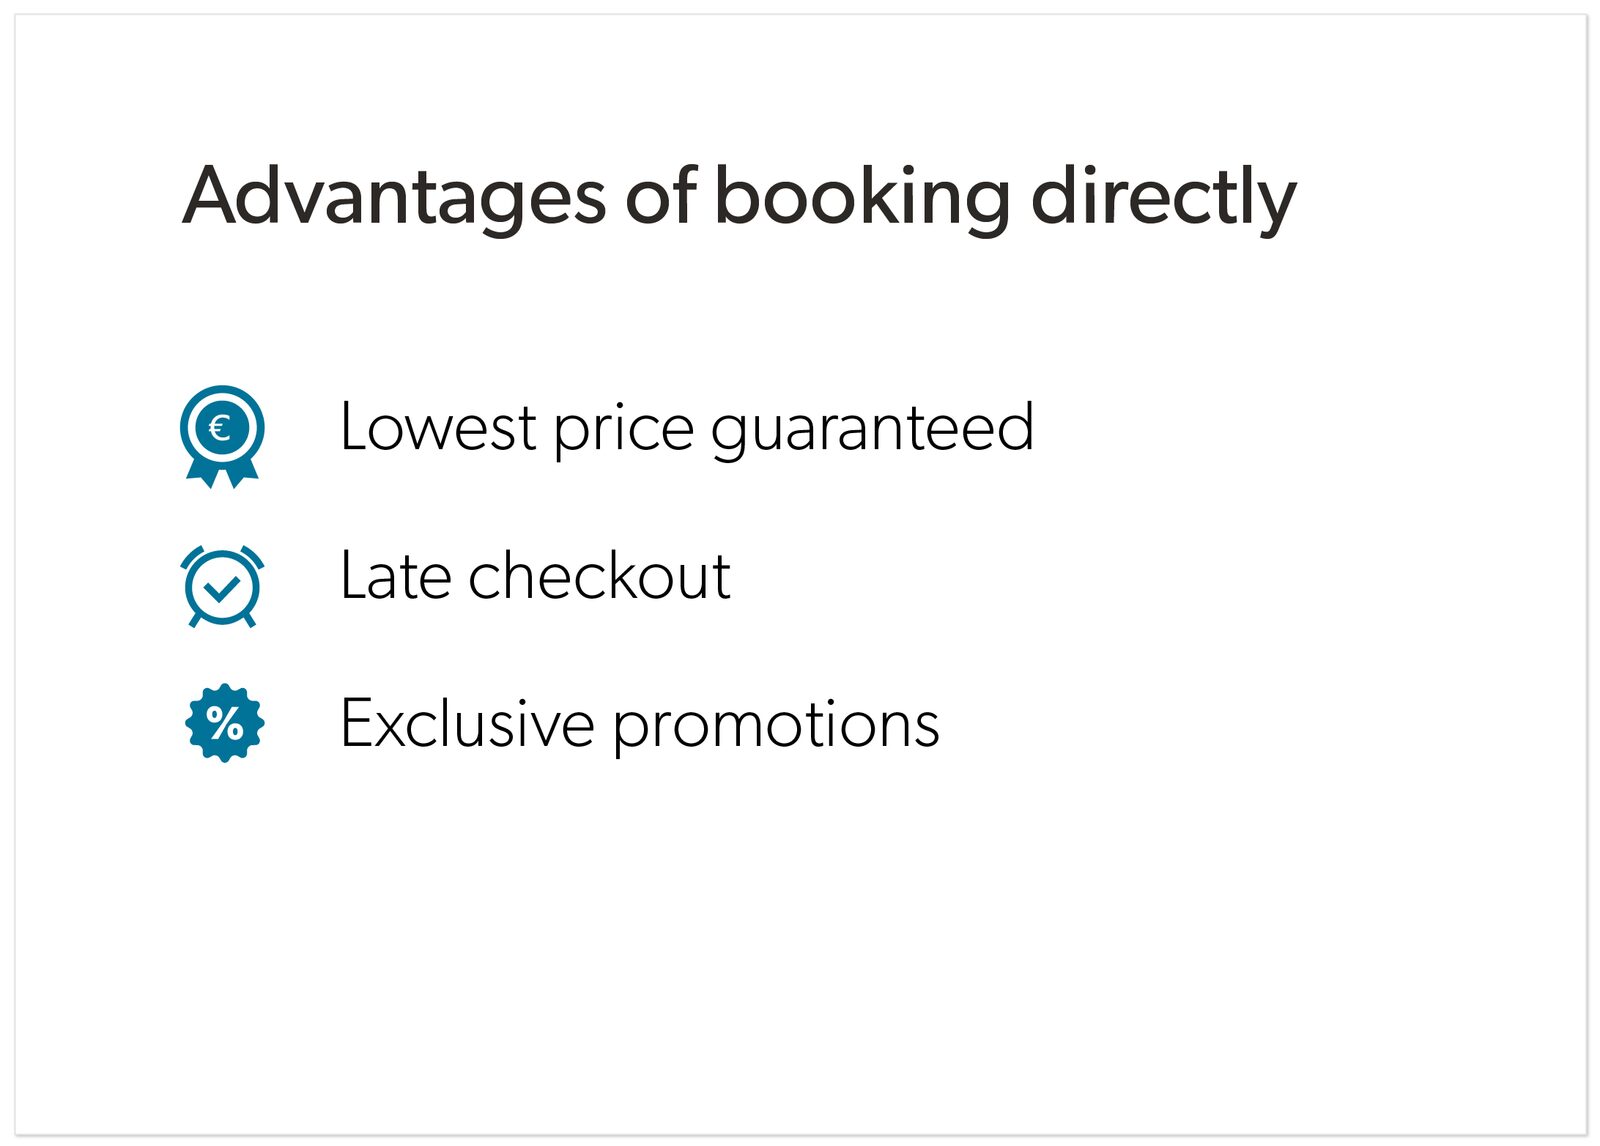 Advantages of booking directly